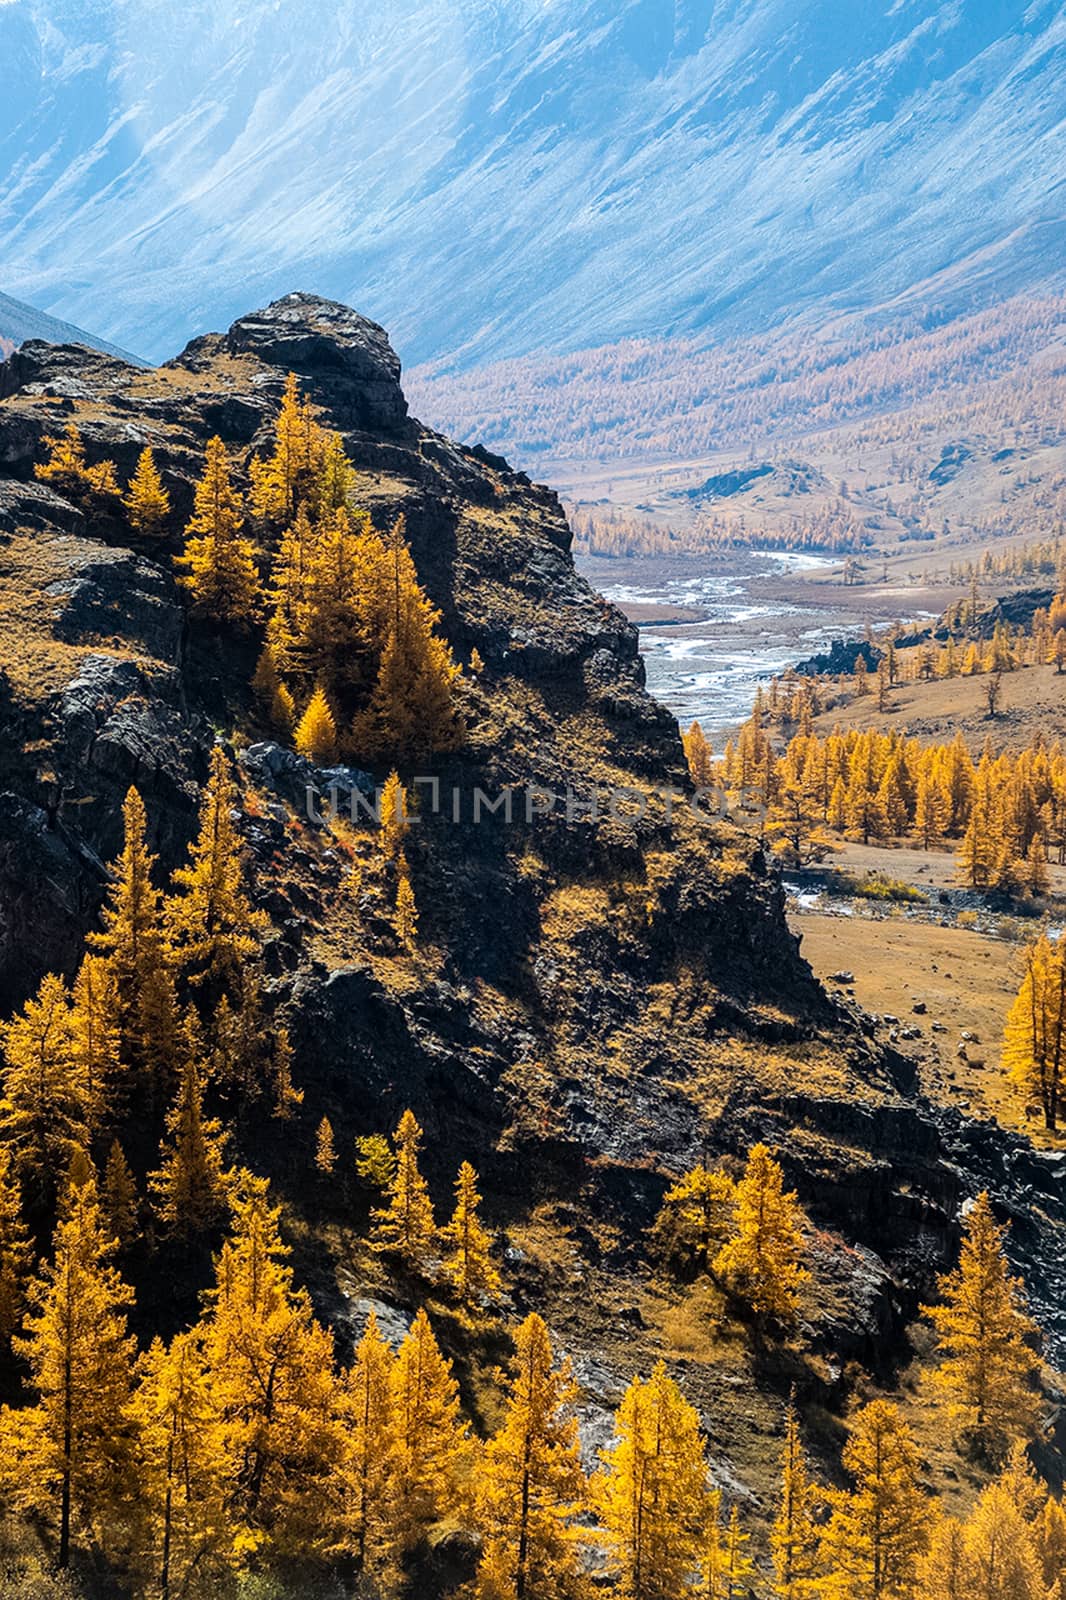 The altai mountains. The landscape of nature on the Altai mountains and in the gorges between the mountains.